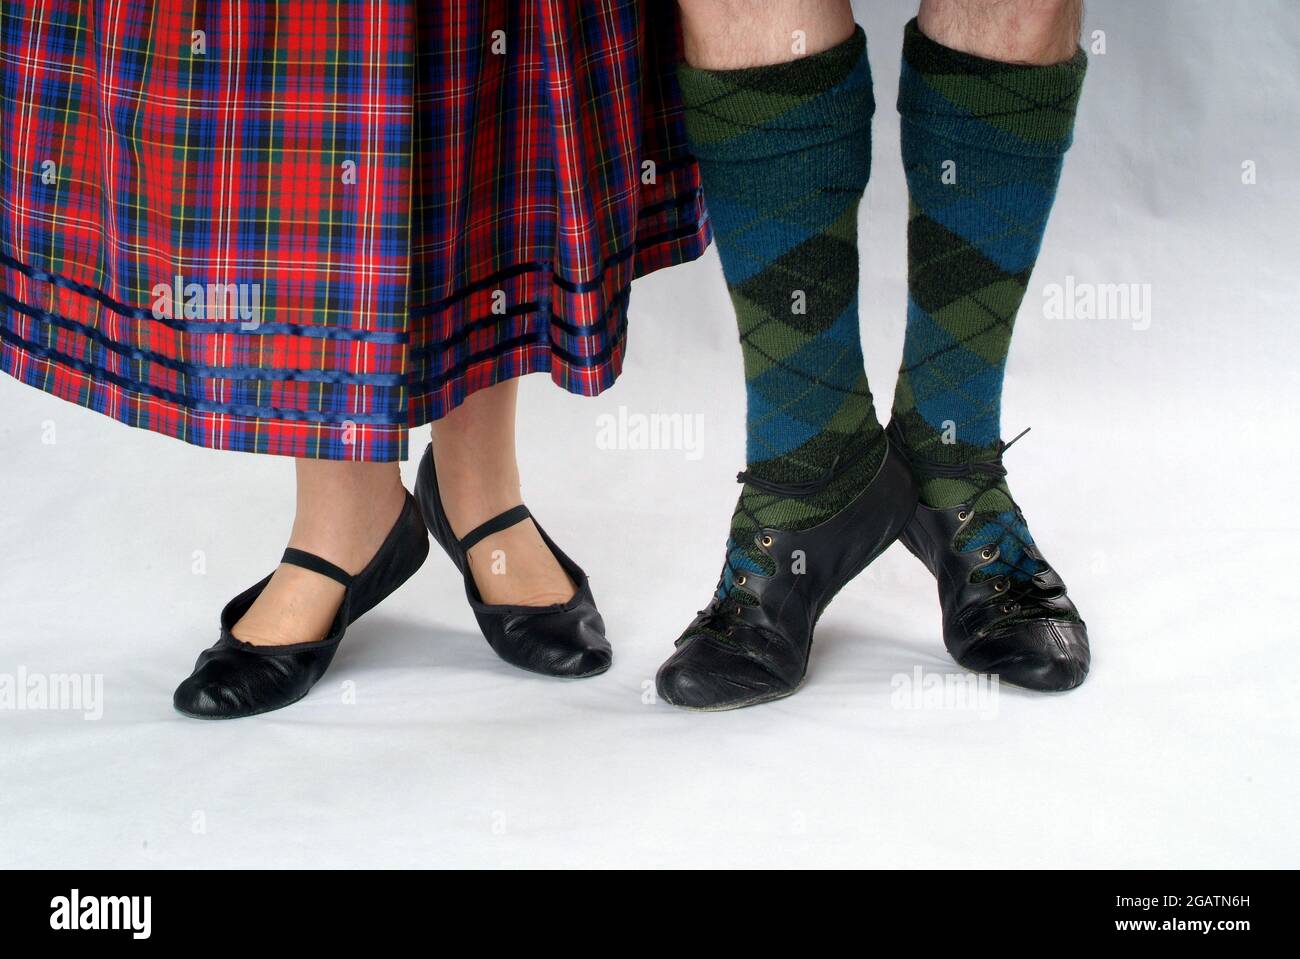 Man and woman couple in Scottish Country Dancing clothes. She wears a tartan skirt, he wears tartan stockings. Both wear shoes known as ghillies Stock Photo